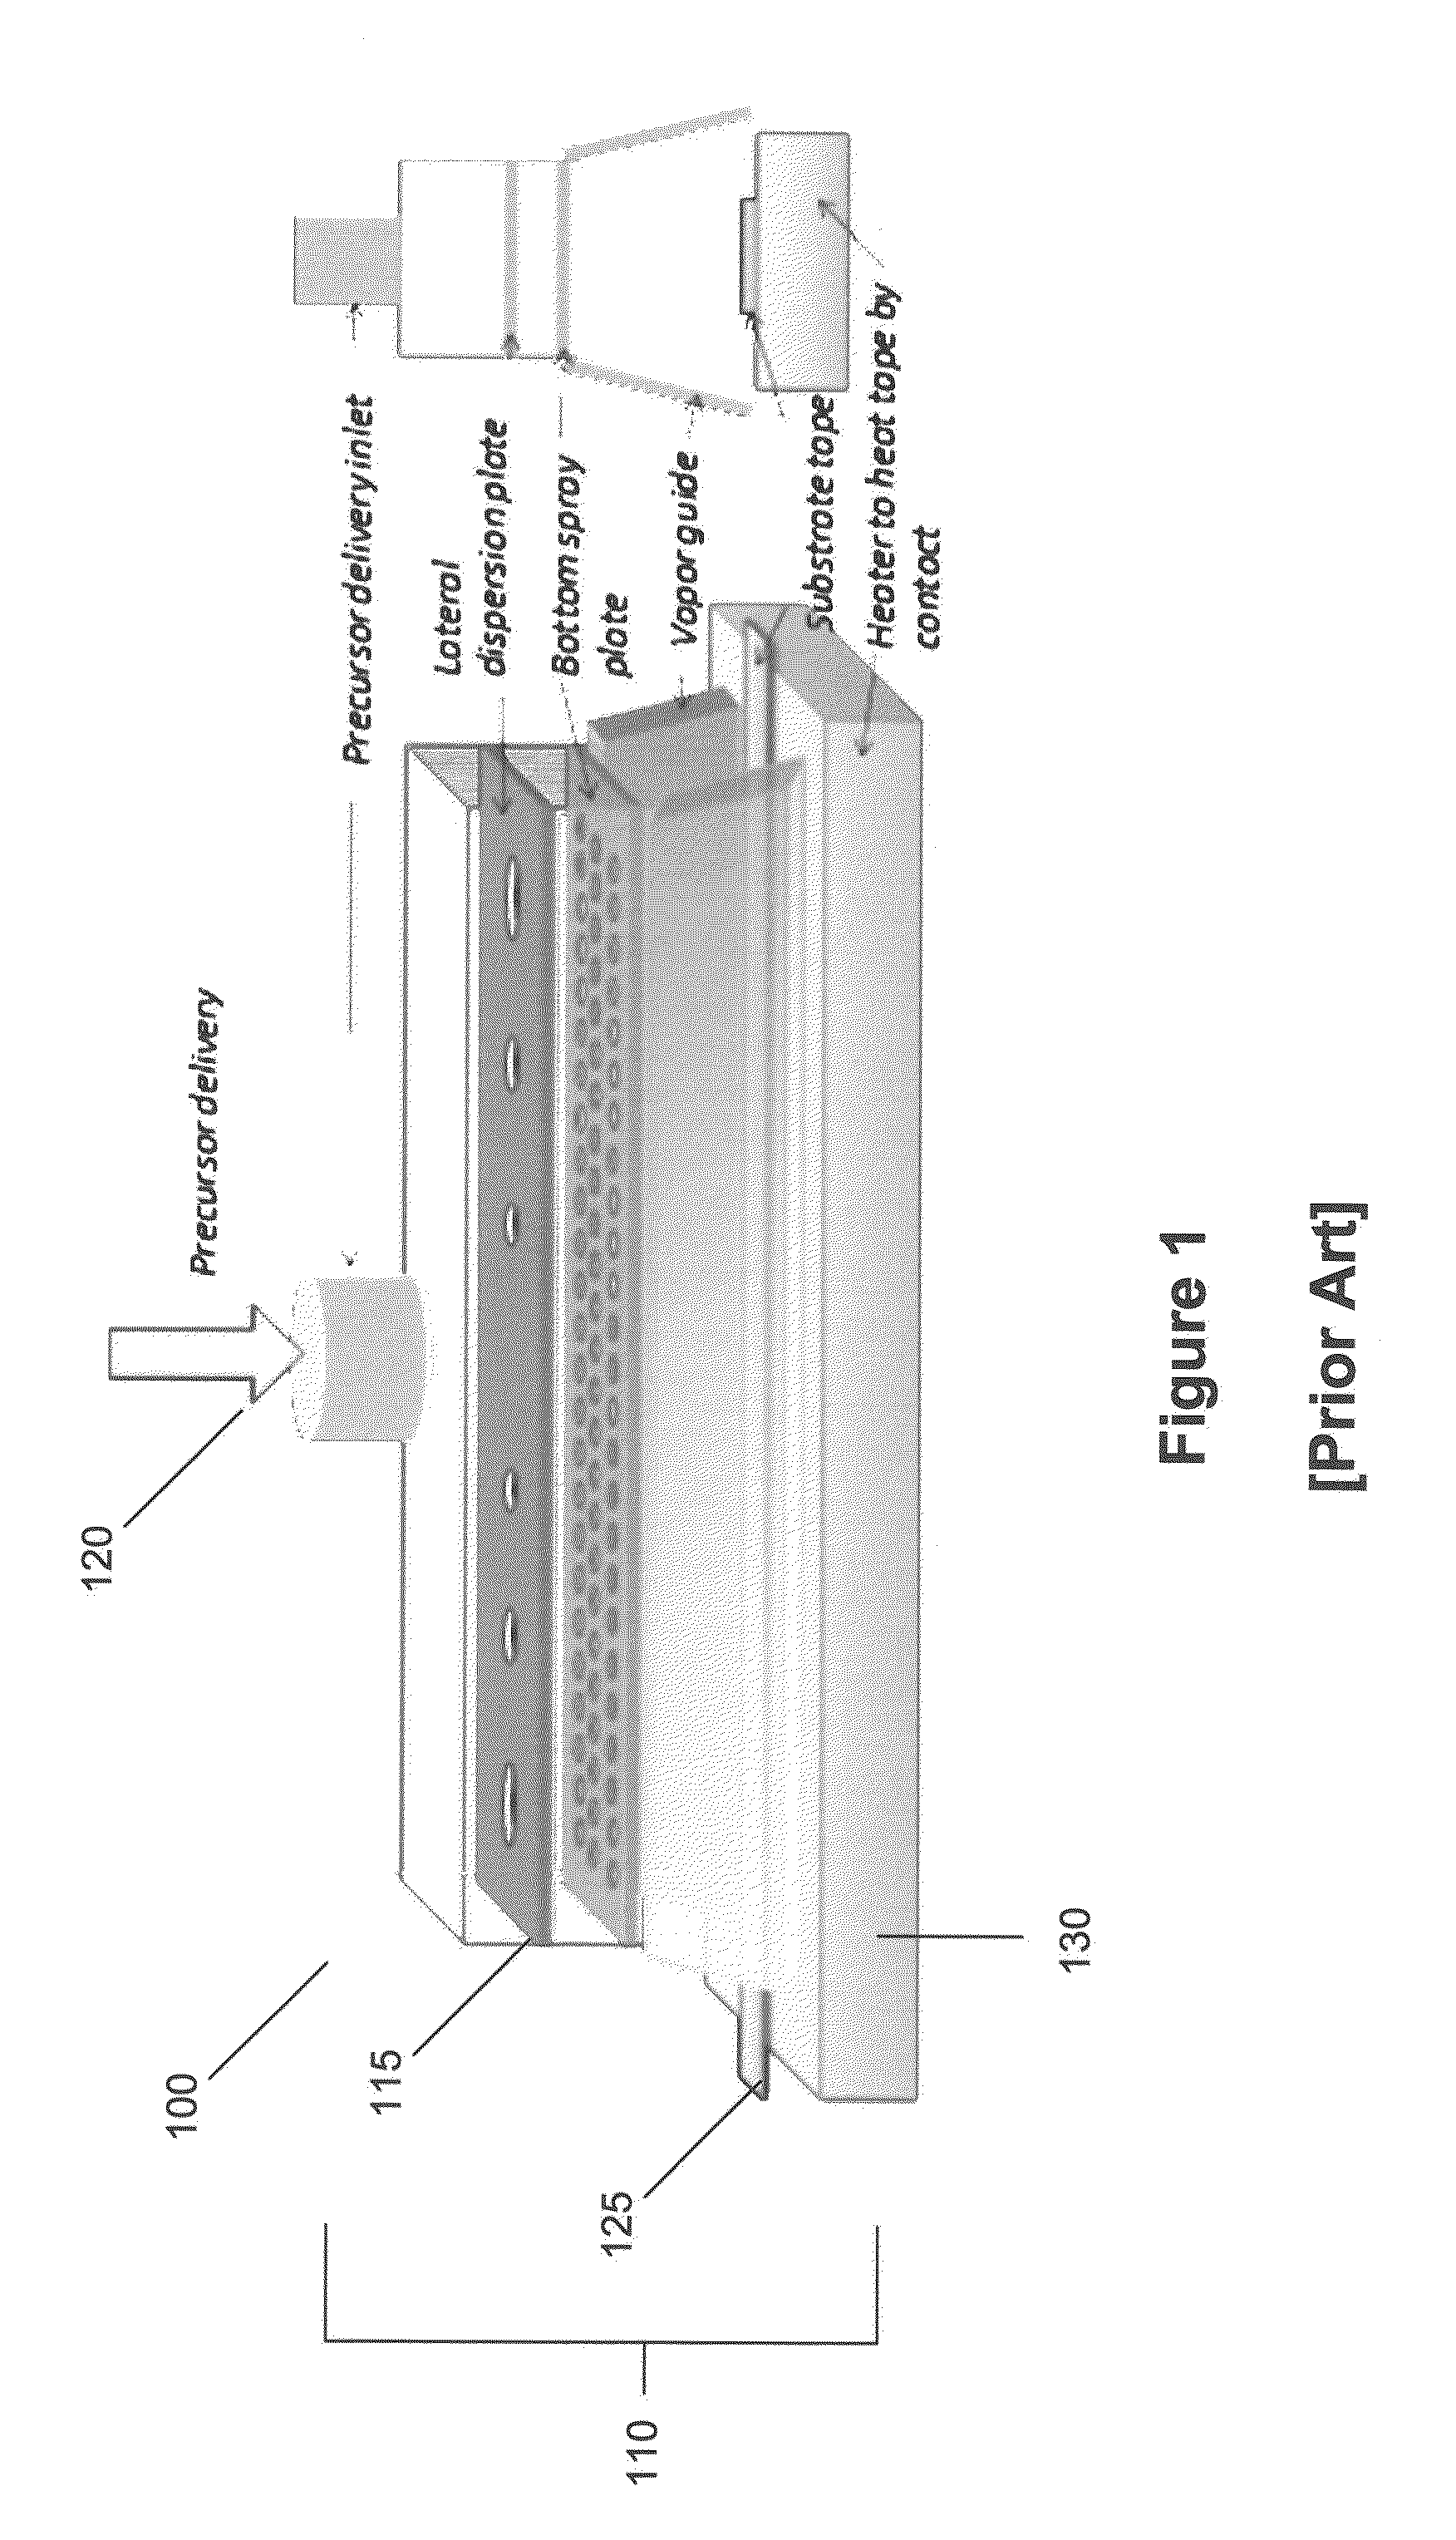 Methods and Systems for Fabricating High Quality Superconducting Tapes